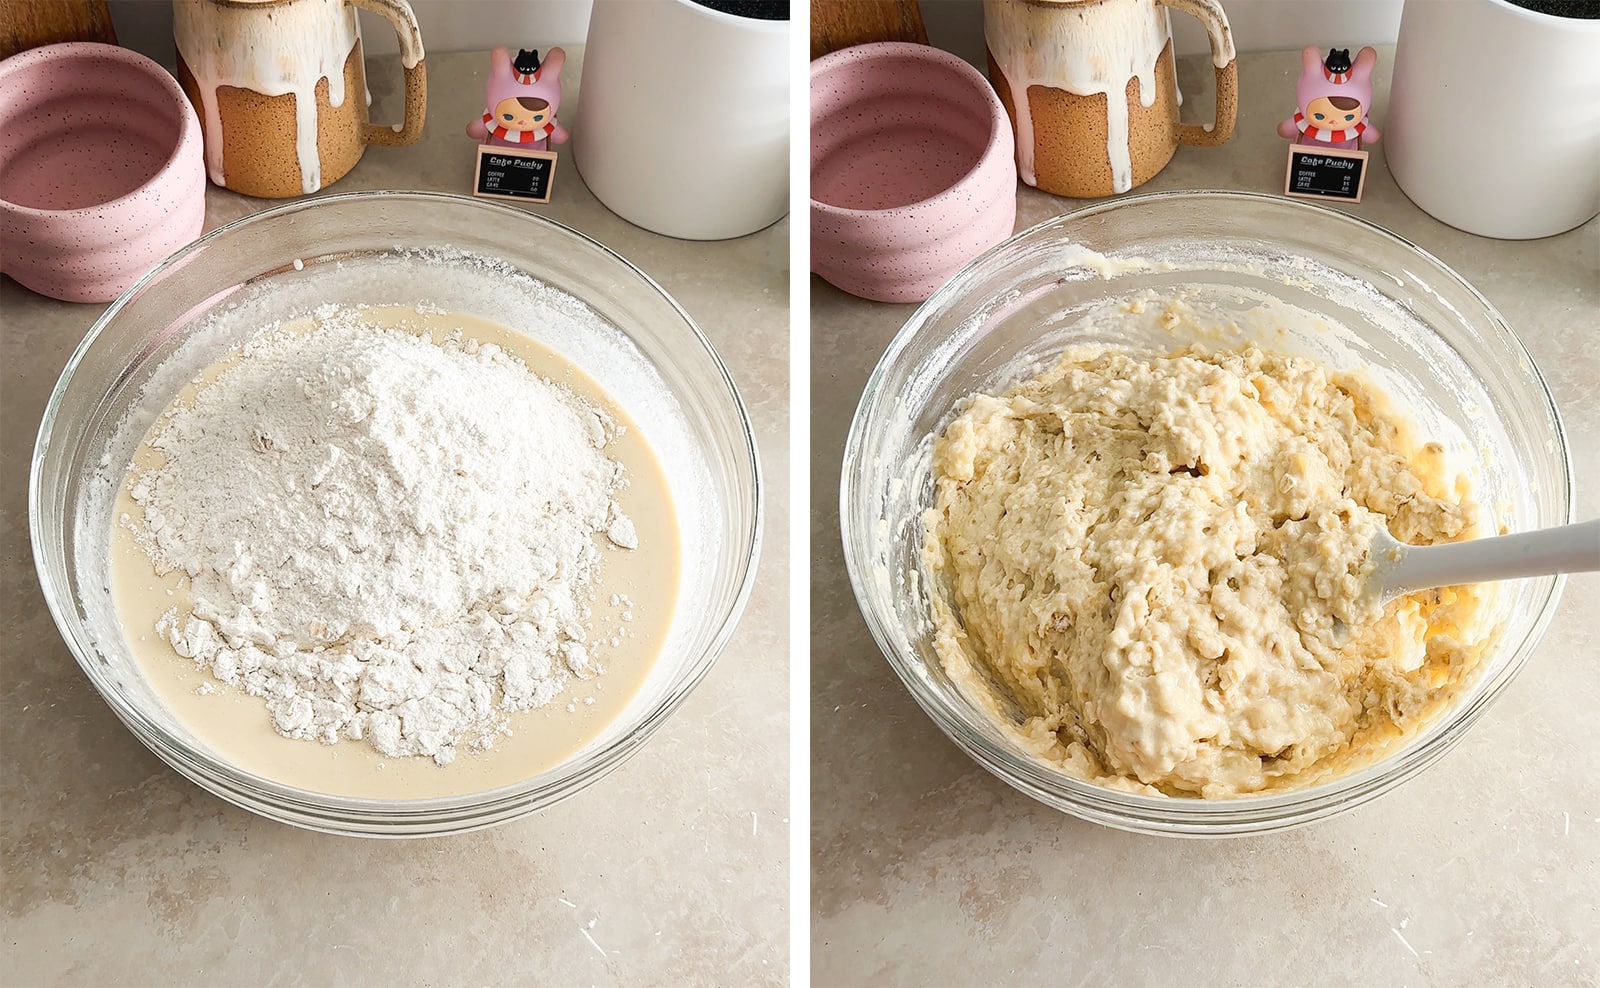 Left to right: flour mixture in a bowl of wet ingredients, mixed muffin batter in a mixing bowl.